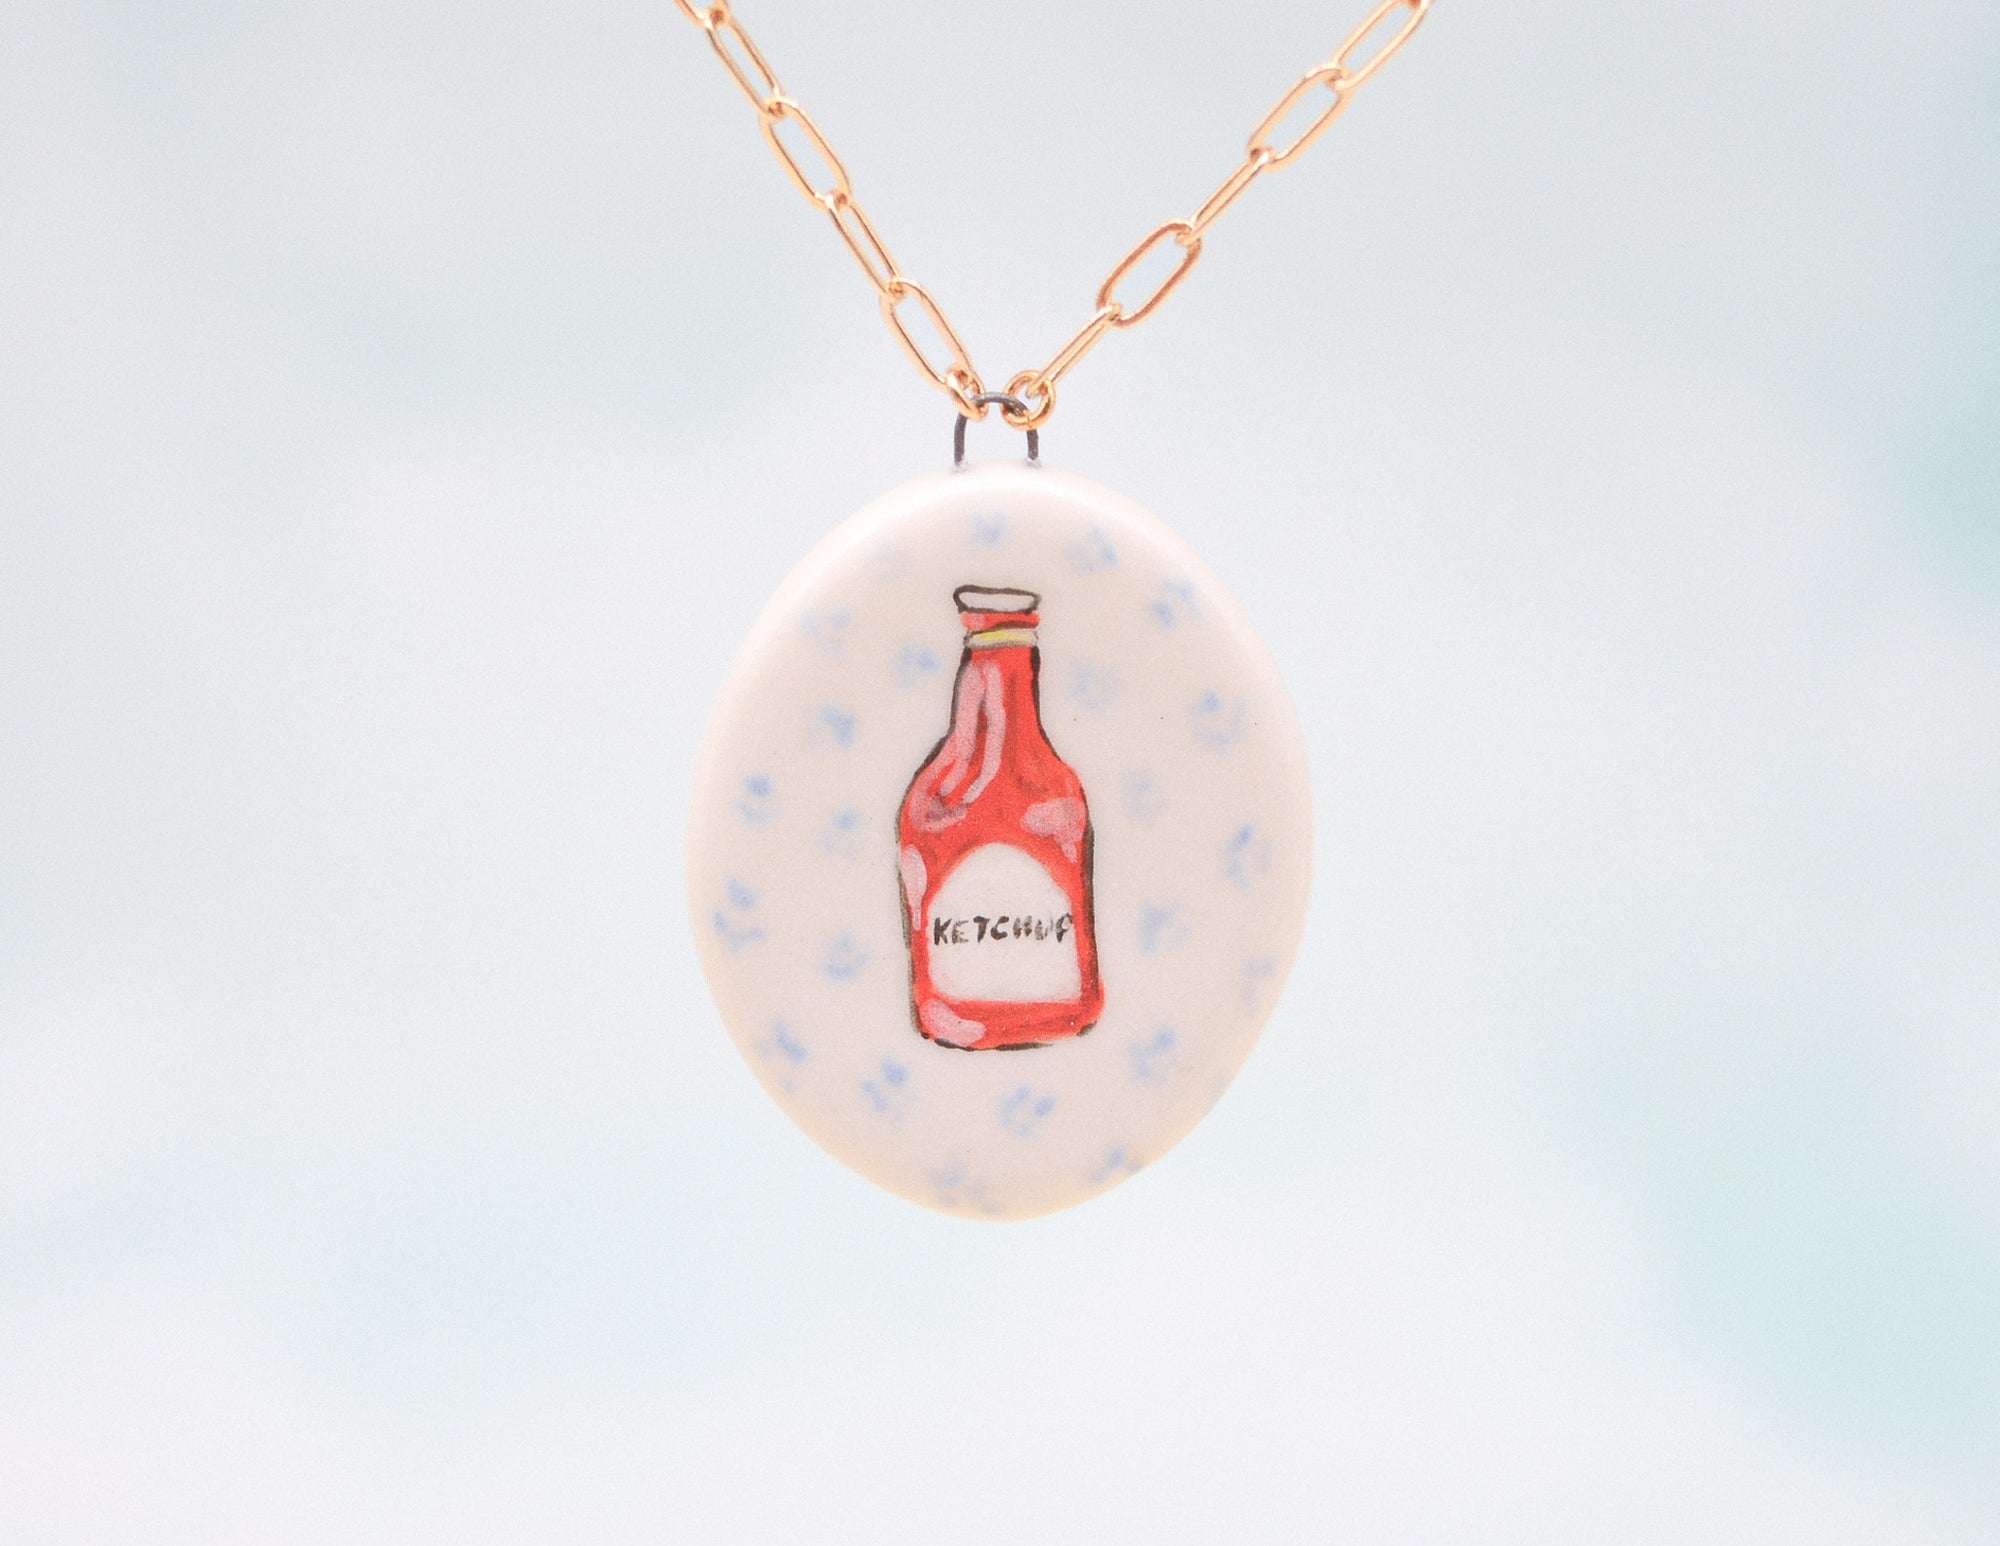 Ketchup Necklace